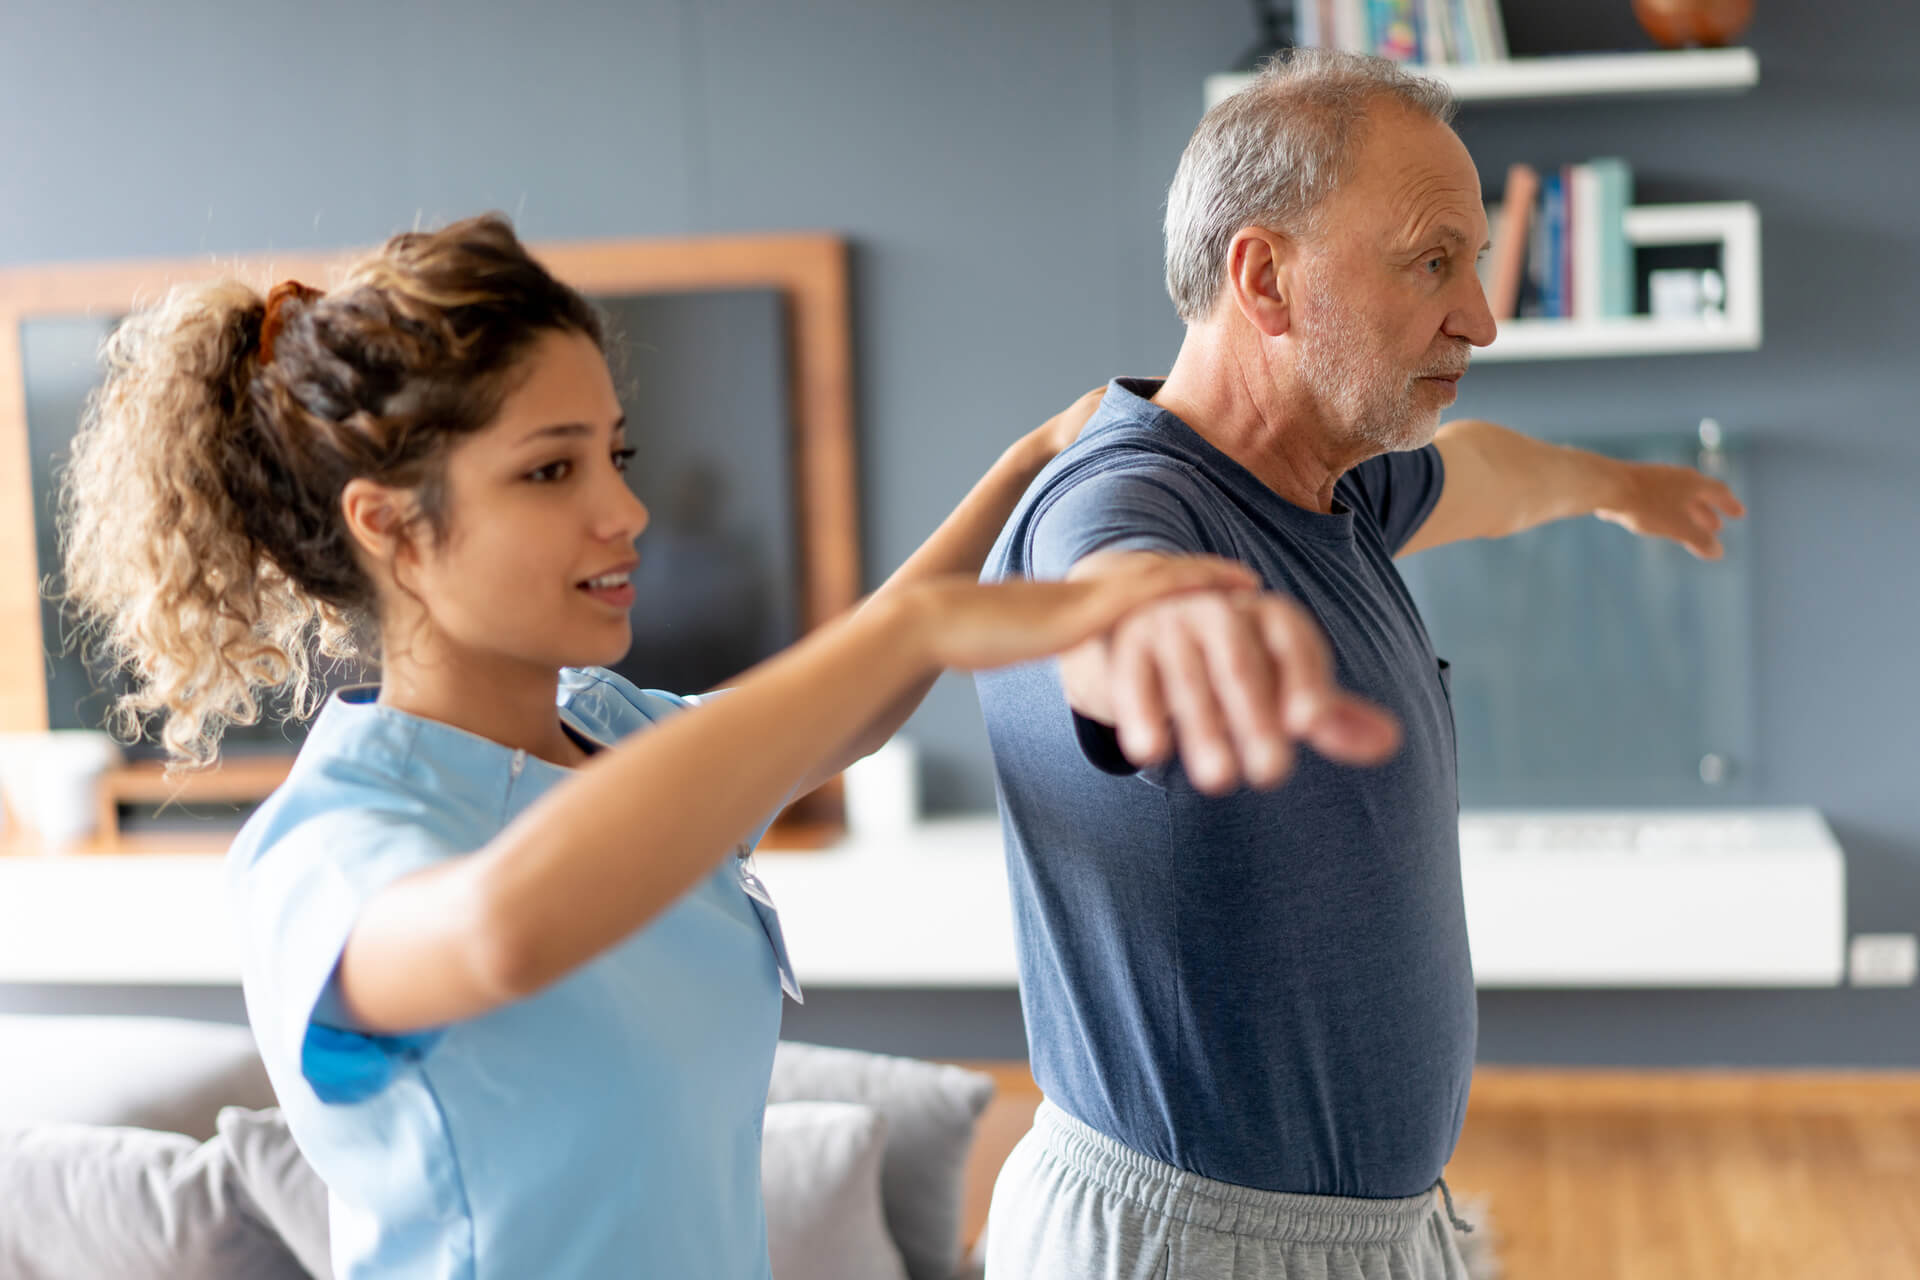 Physio helps an older man spread his arms